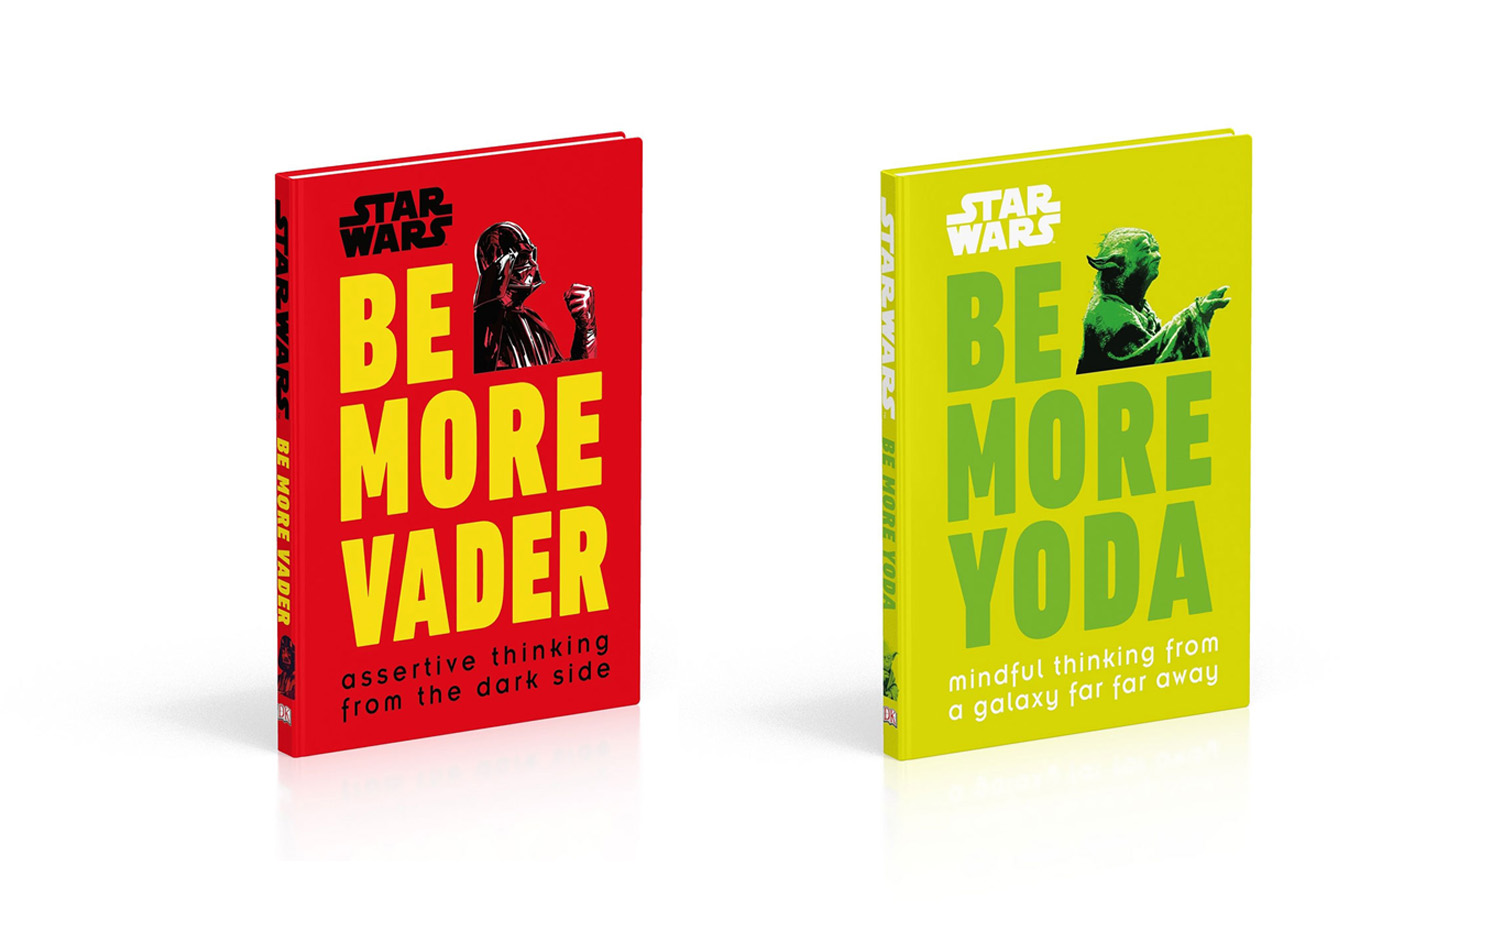 Star Wars: Be More Vader / Star Wars: Be More Yoda | From DK Books